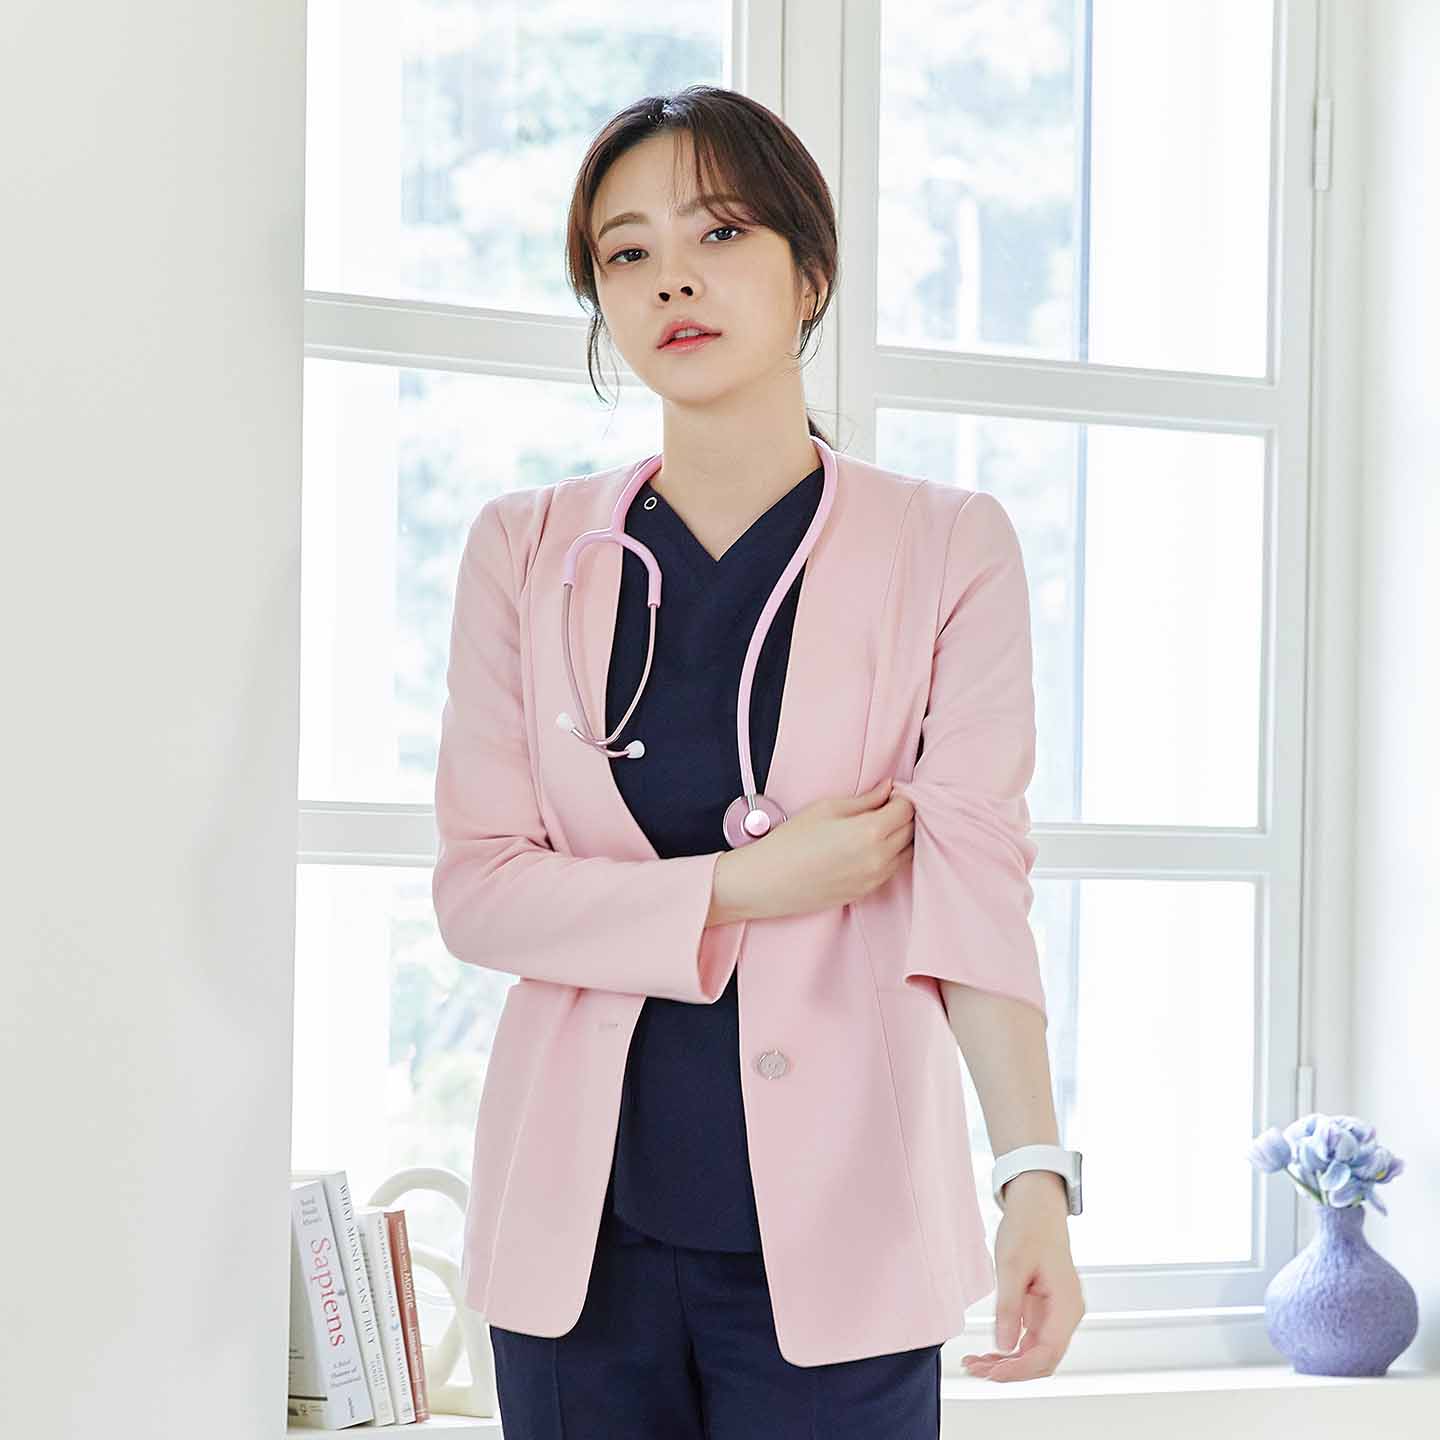 Woman in soft pink Zenir jacket over navy top, pink stethoscope, standing with arm crossed, in a room with a window and books,Soft Pink